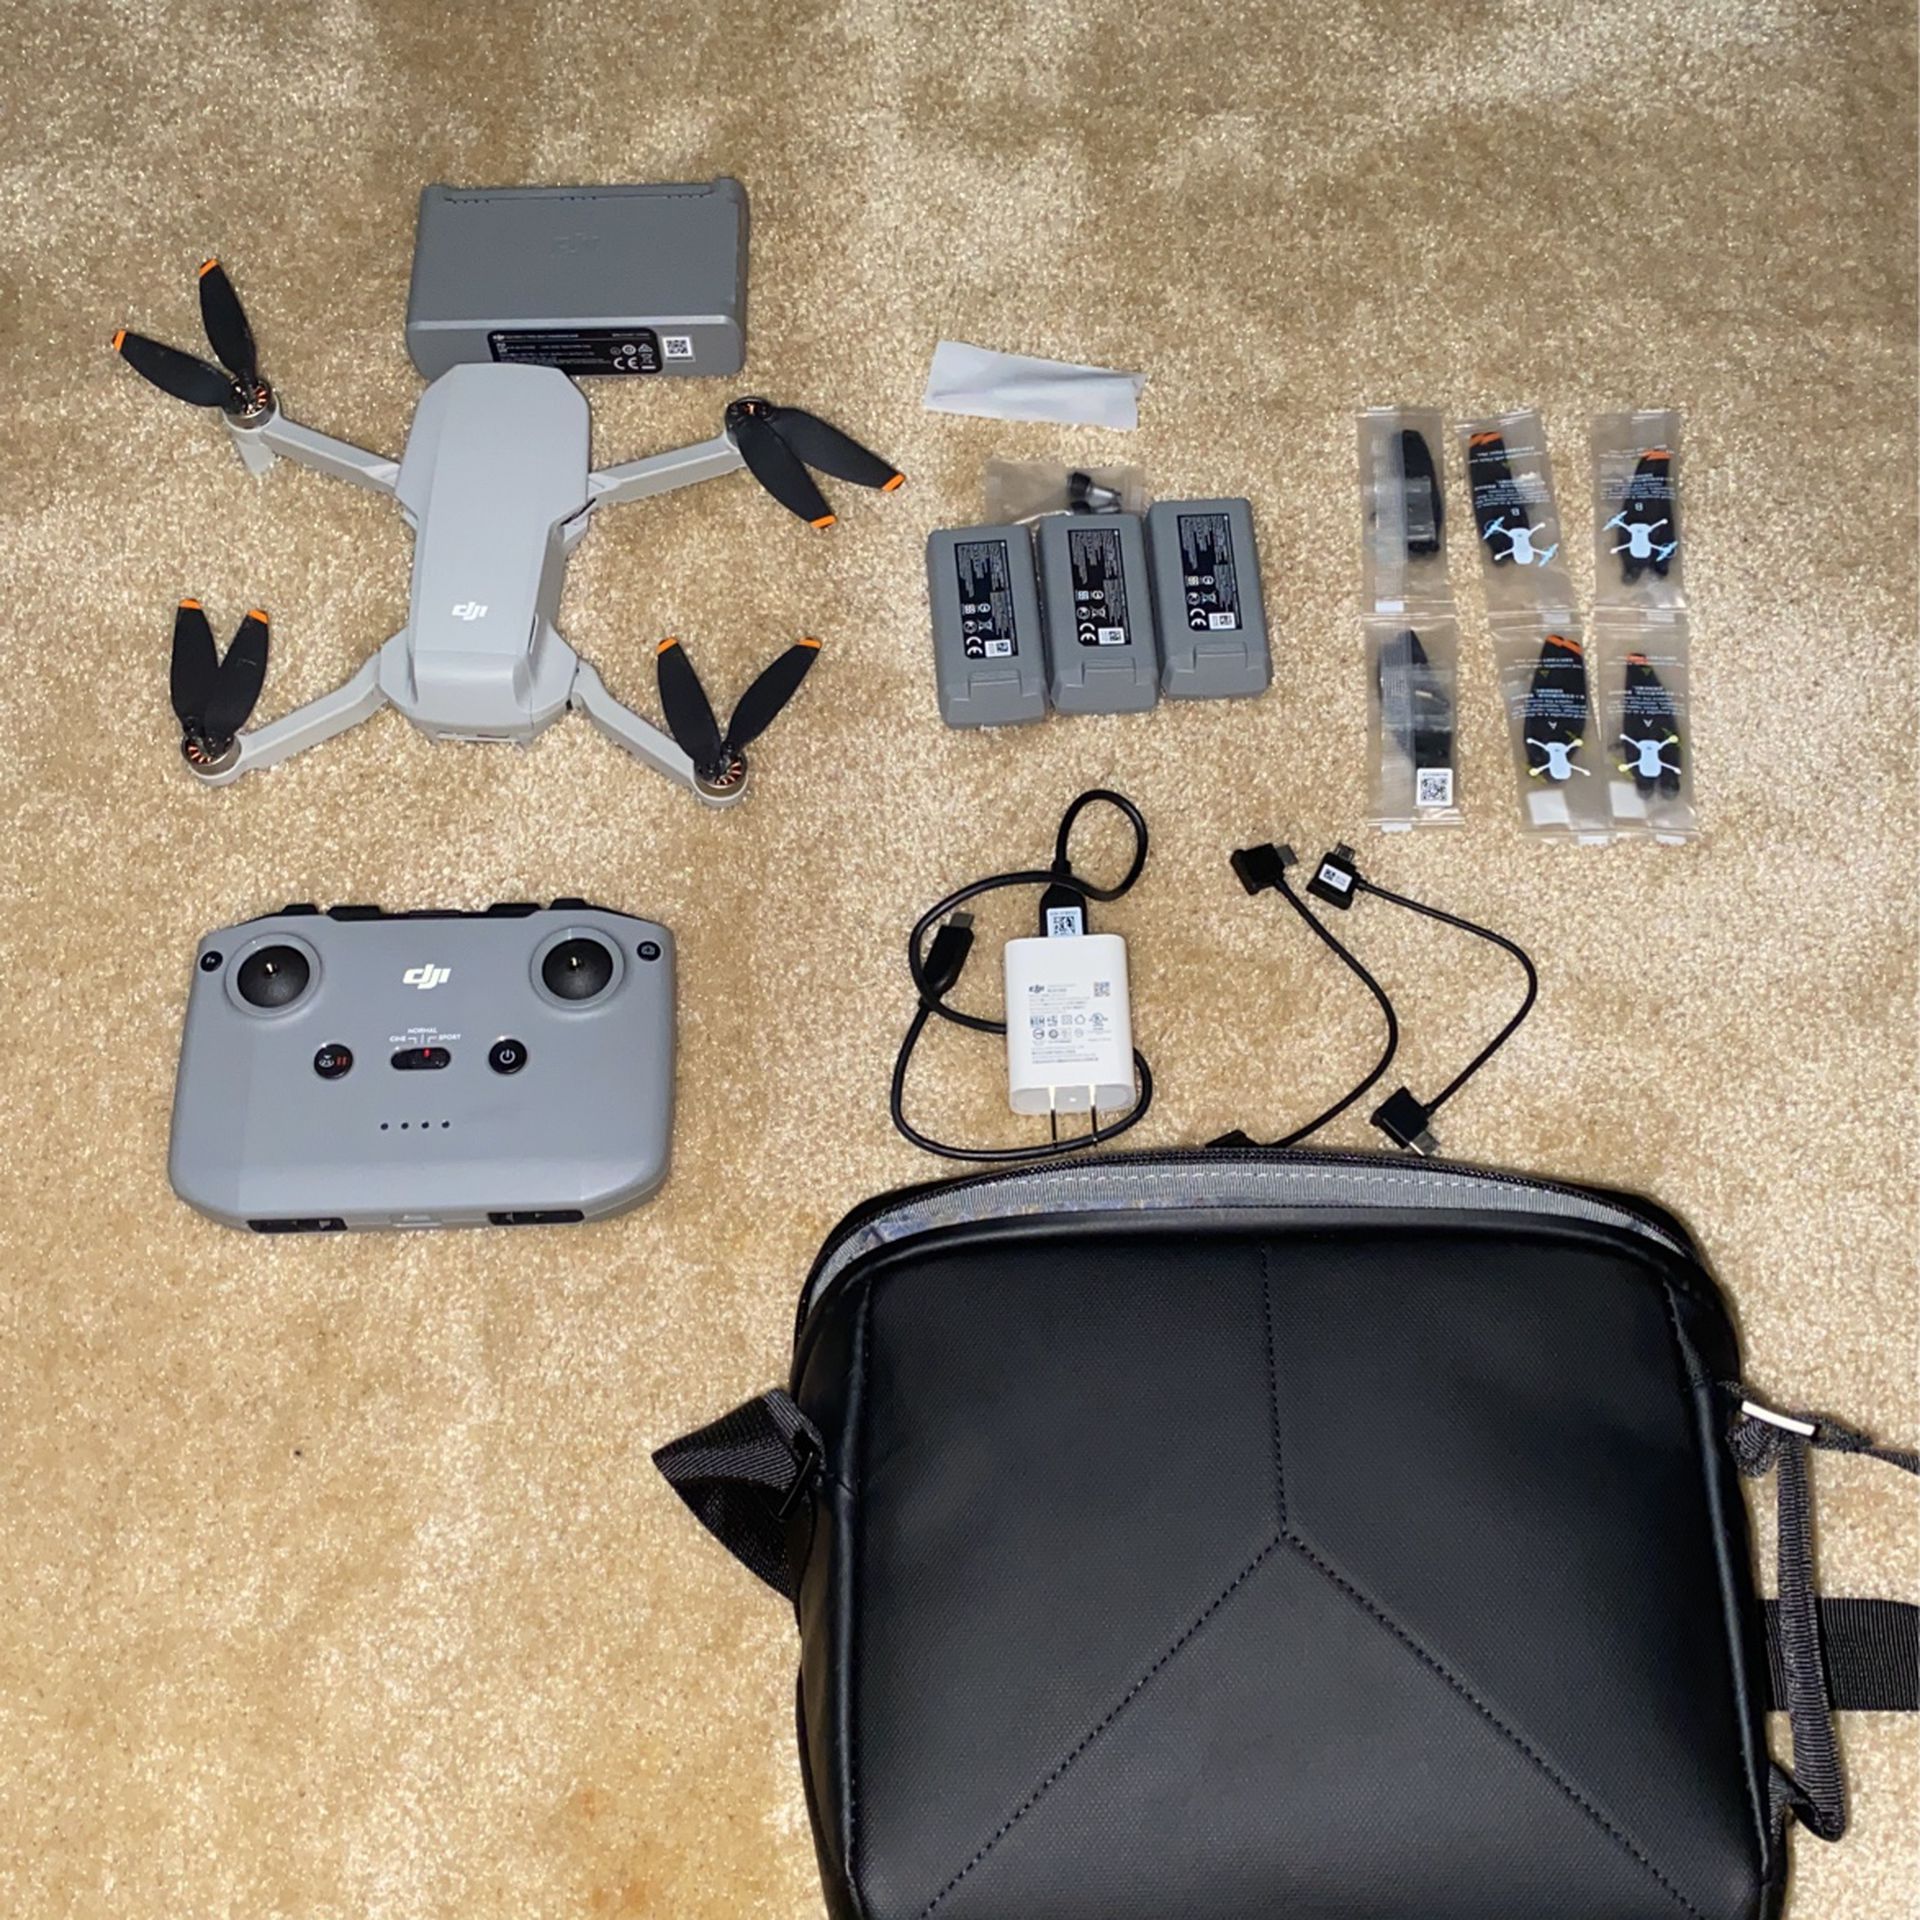 DJI Mini 2 Drone Fly More Bundle For Flying/Photography/Video